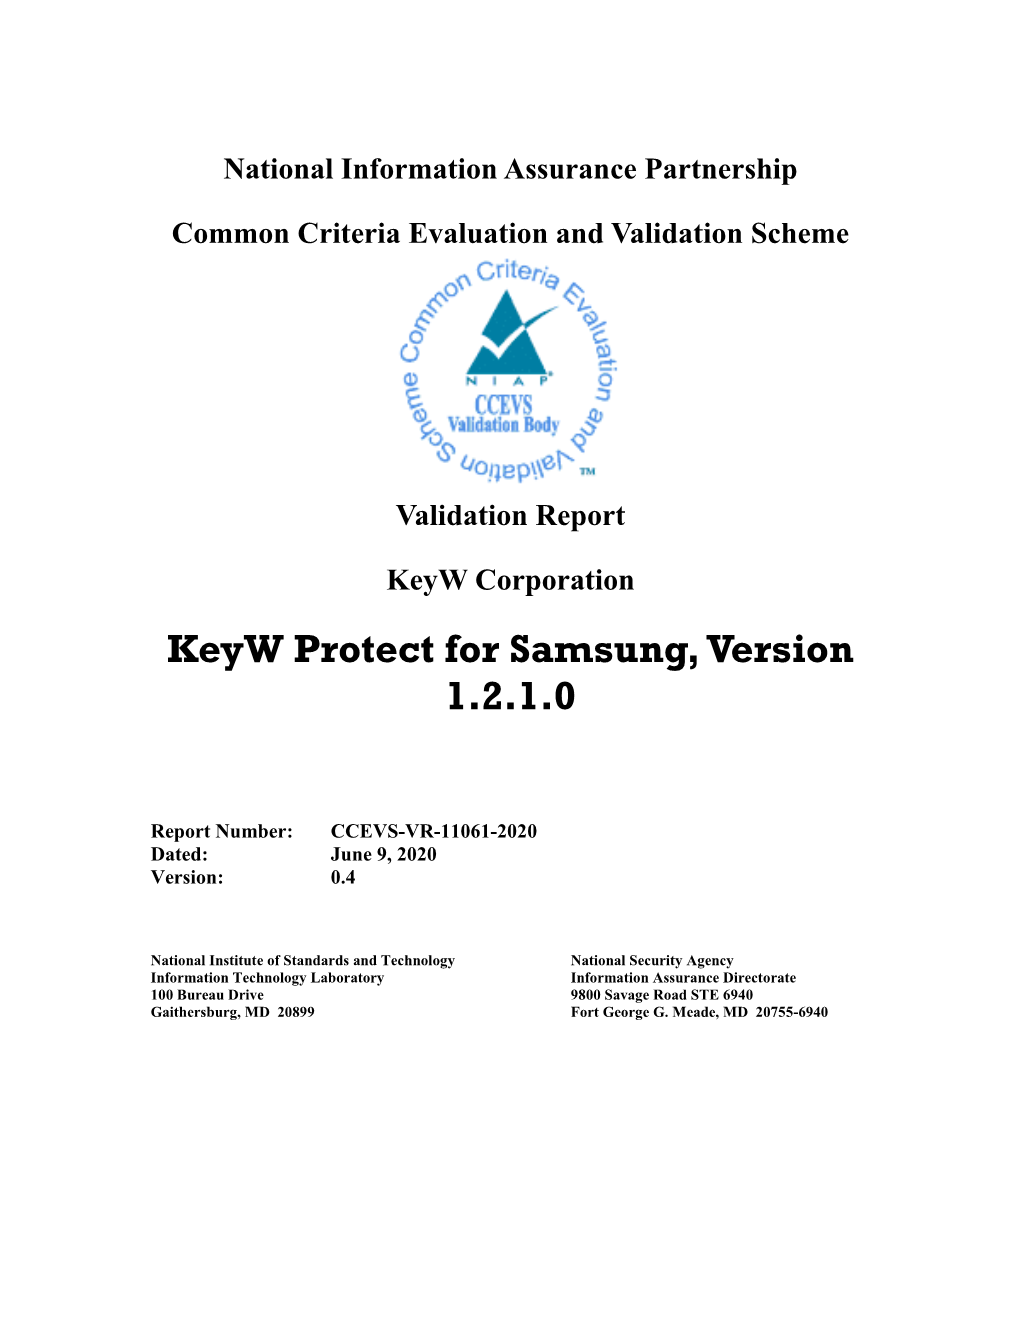 Keyw Protect for Samsung, Version 1.2.1.0